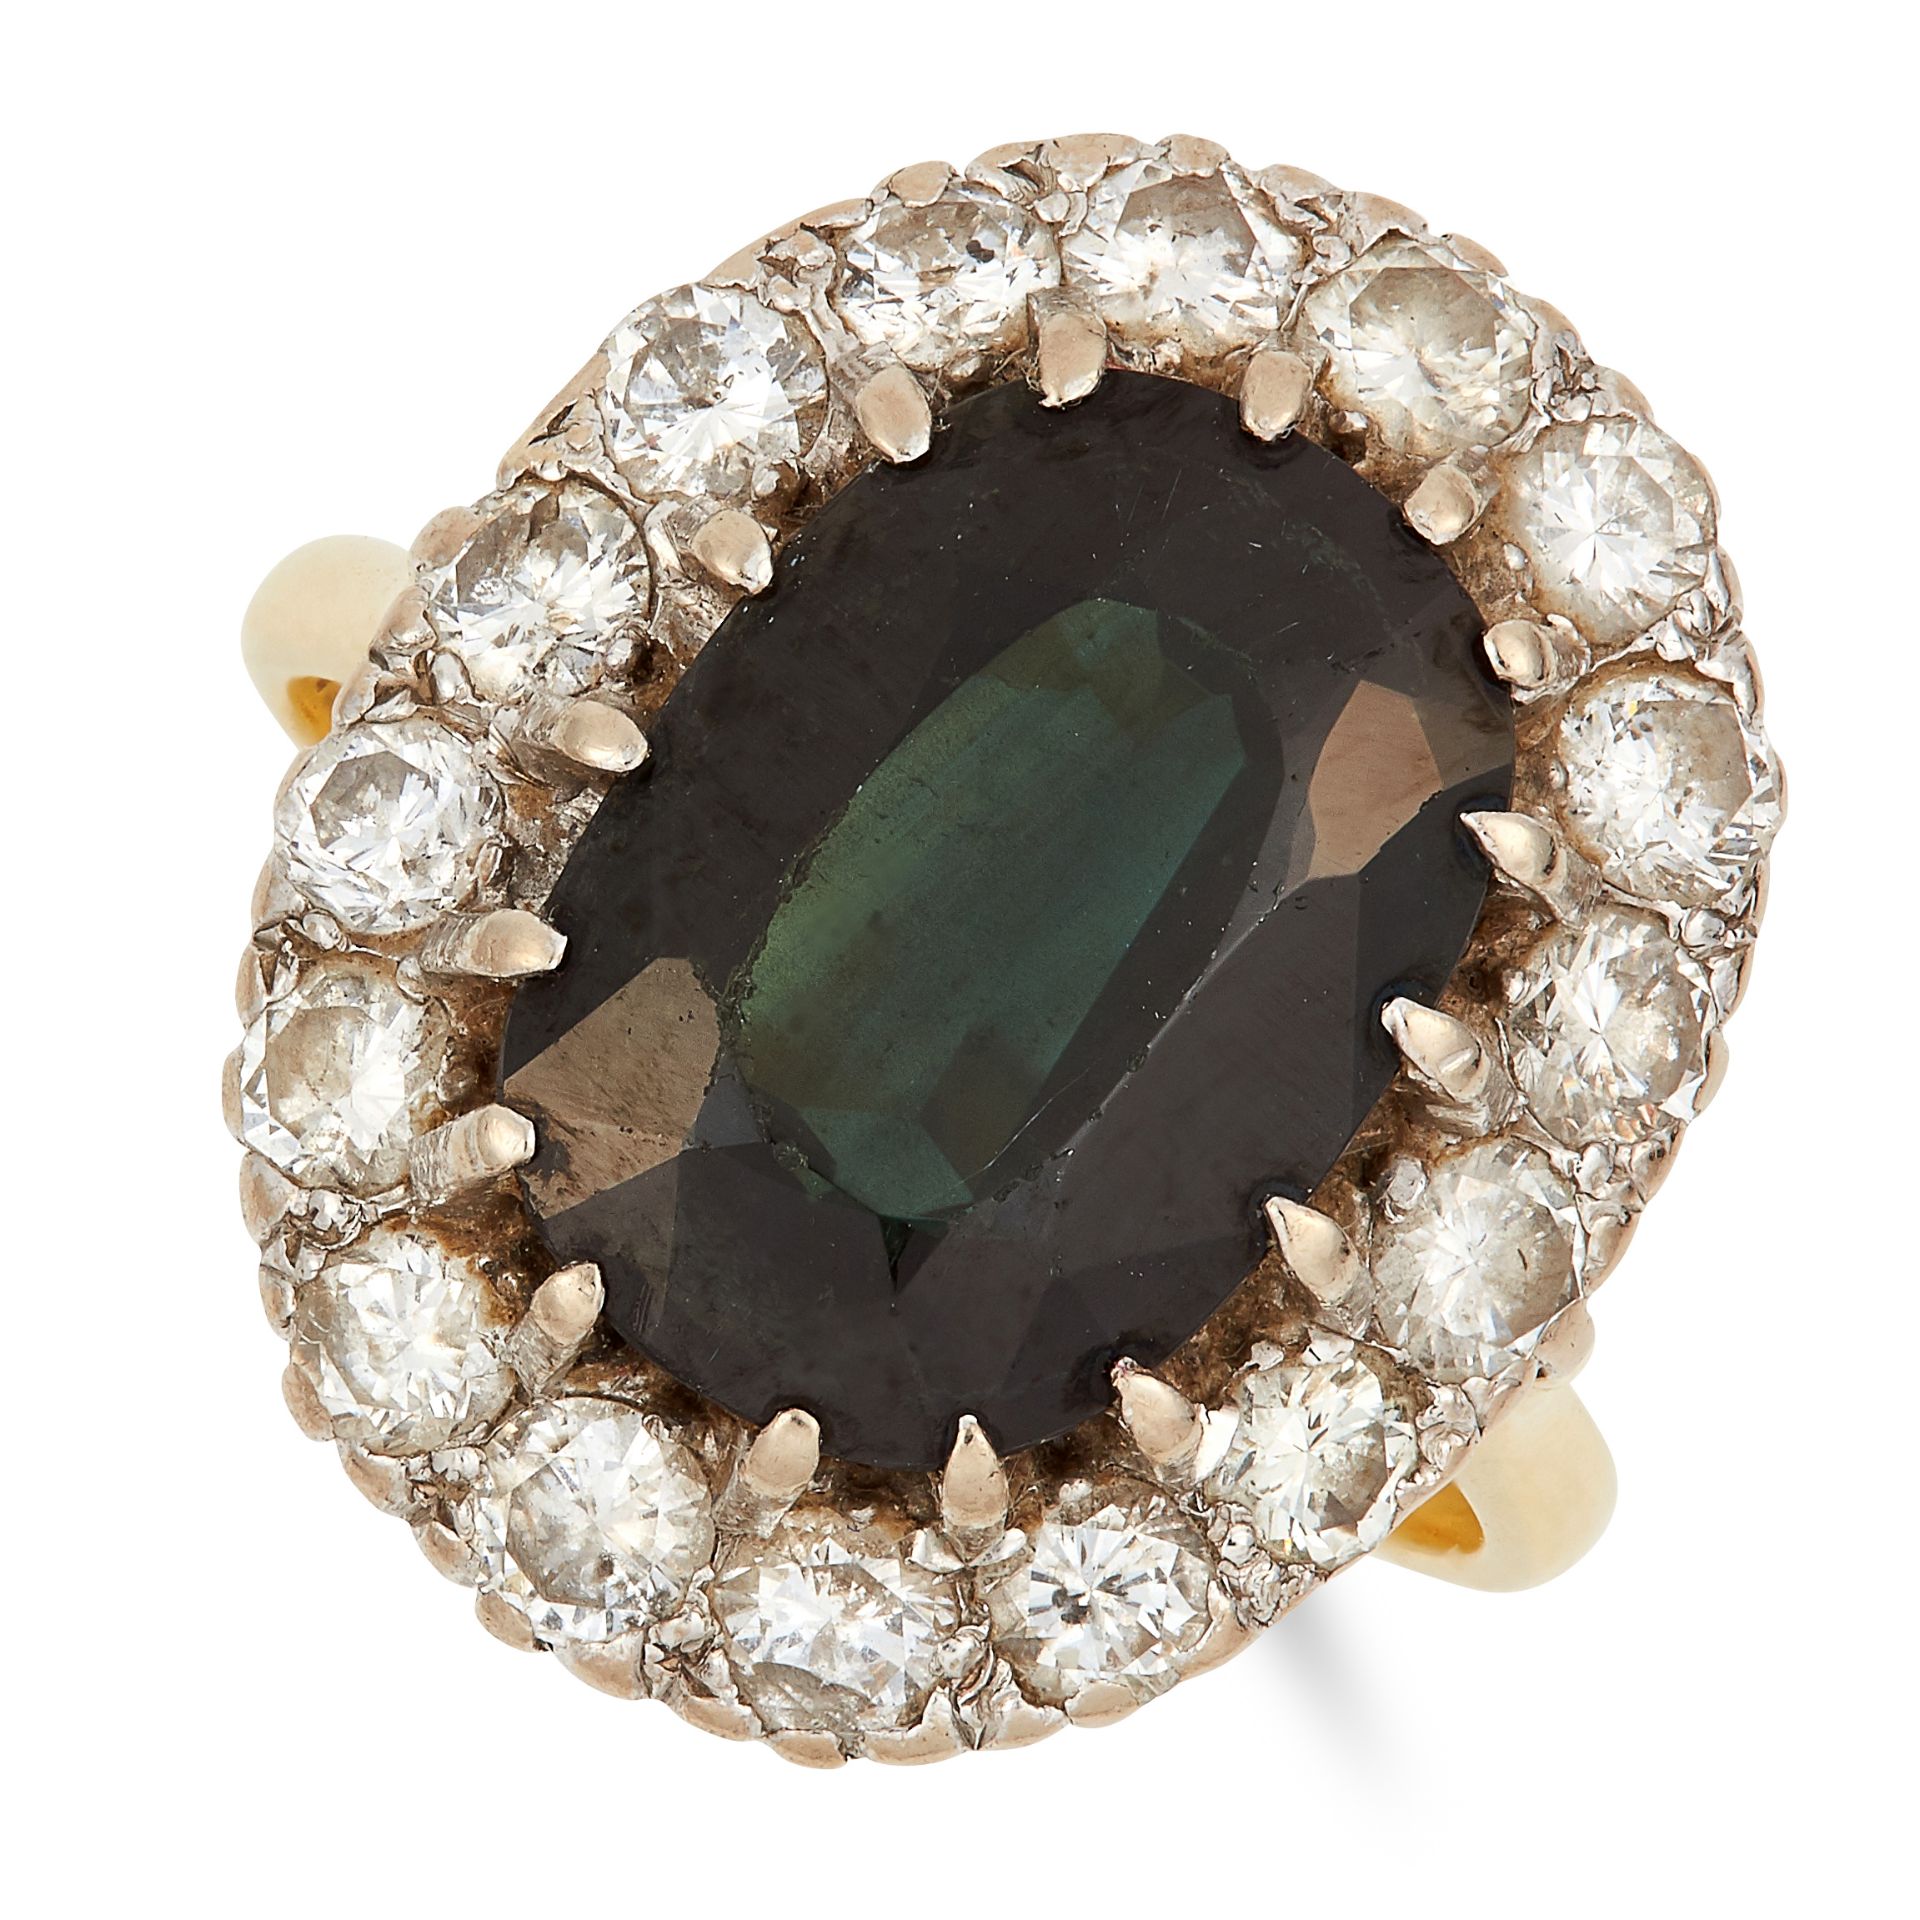 TOURMALINE AND DIAMOND CLUSTER RING set with an oval cut green tourmaline in a cluster of round